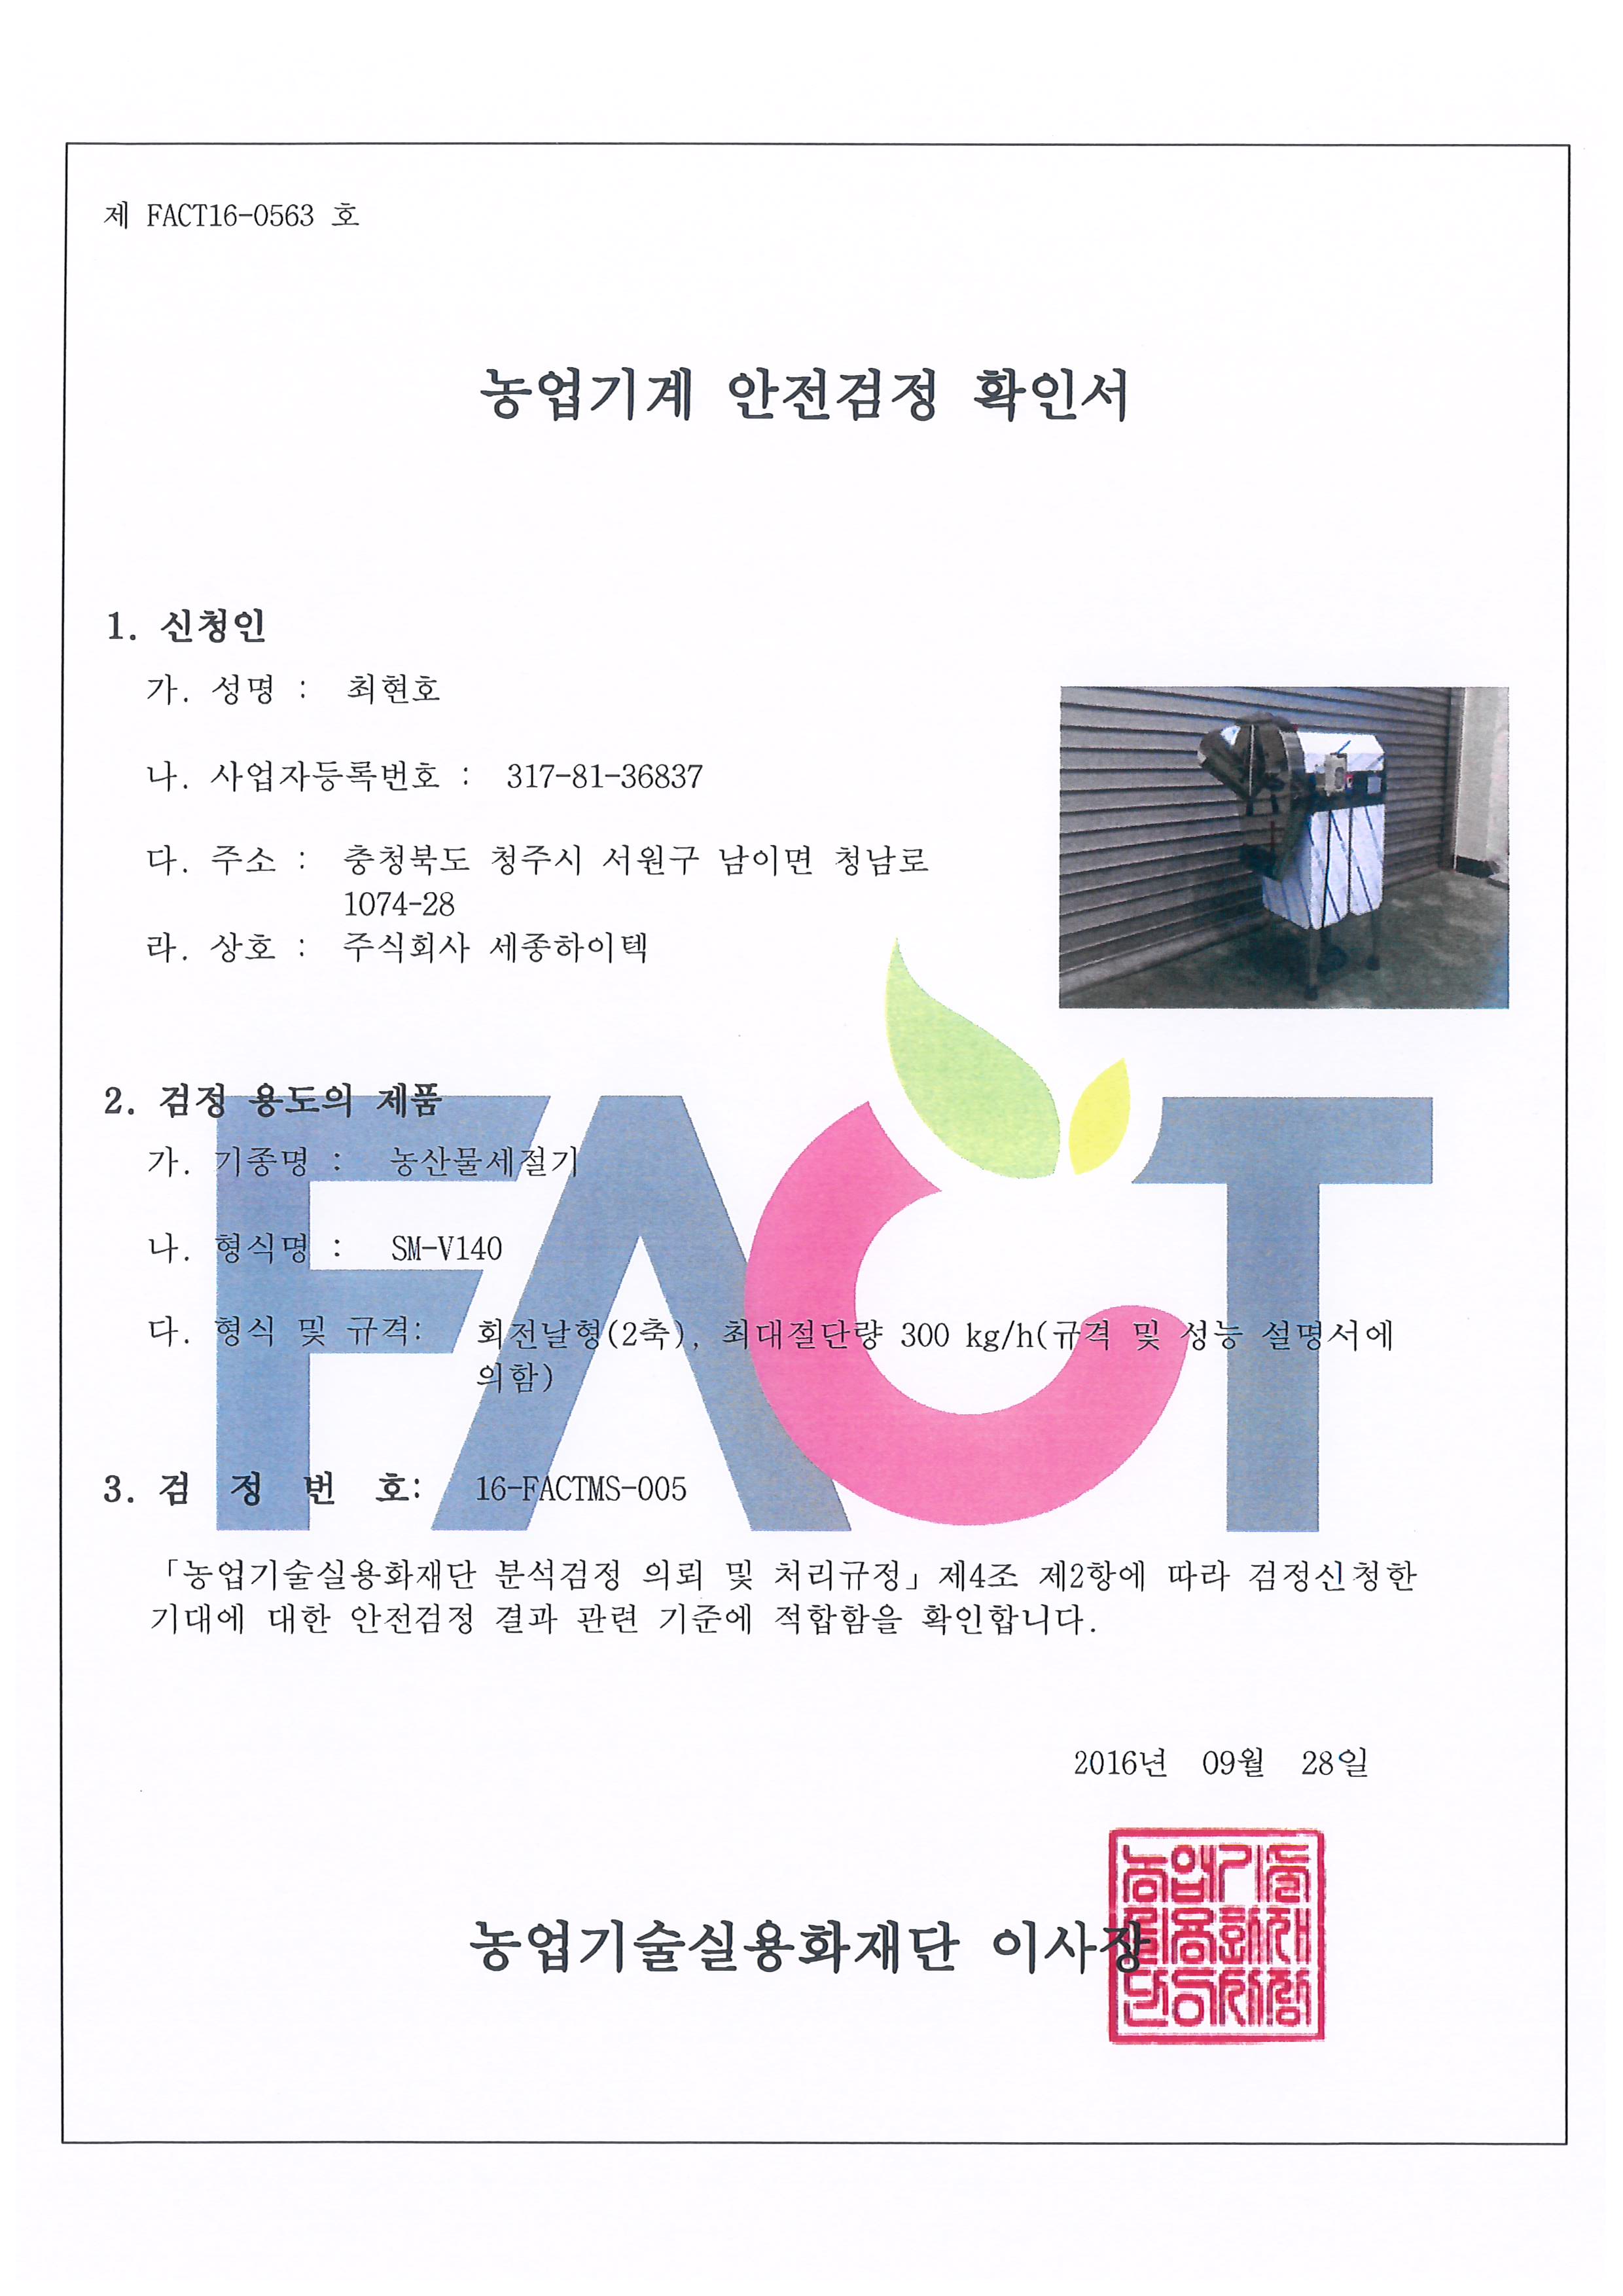 Certification-Agricultural machinery safety inspection certificate-V140 [첨부 이미지1]